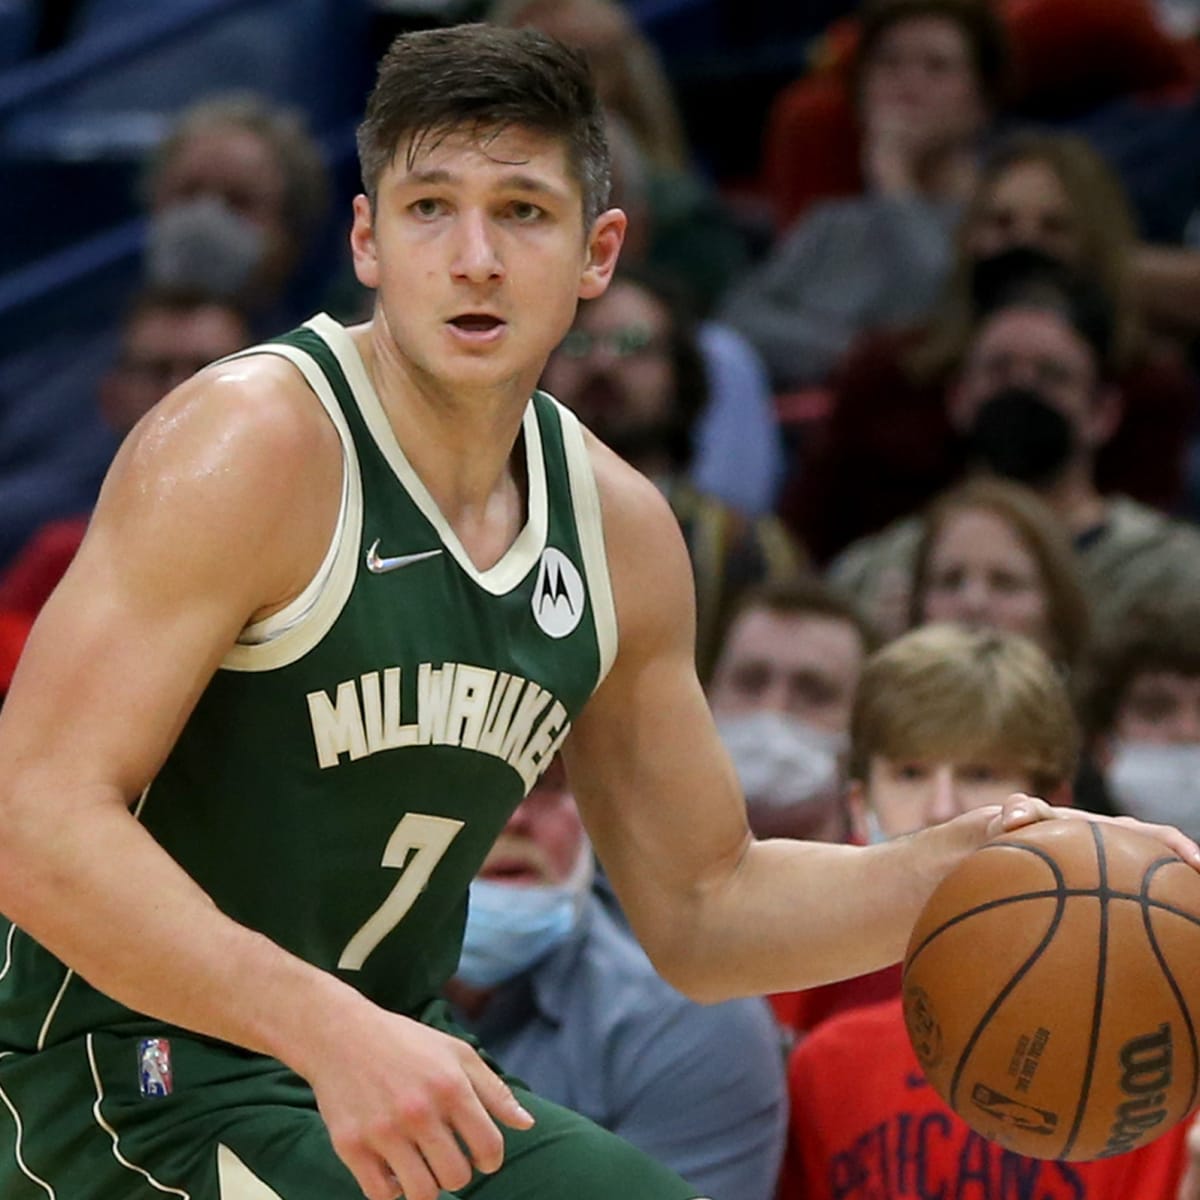 Bucks moving on after Grayson Allen's one-game suspension by NBA